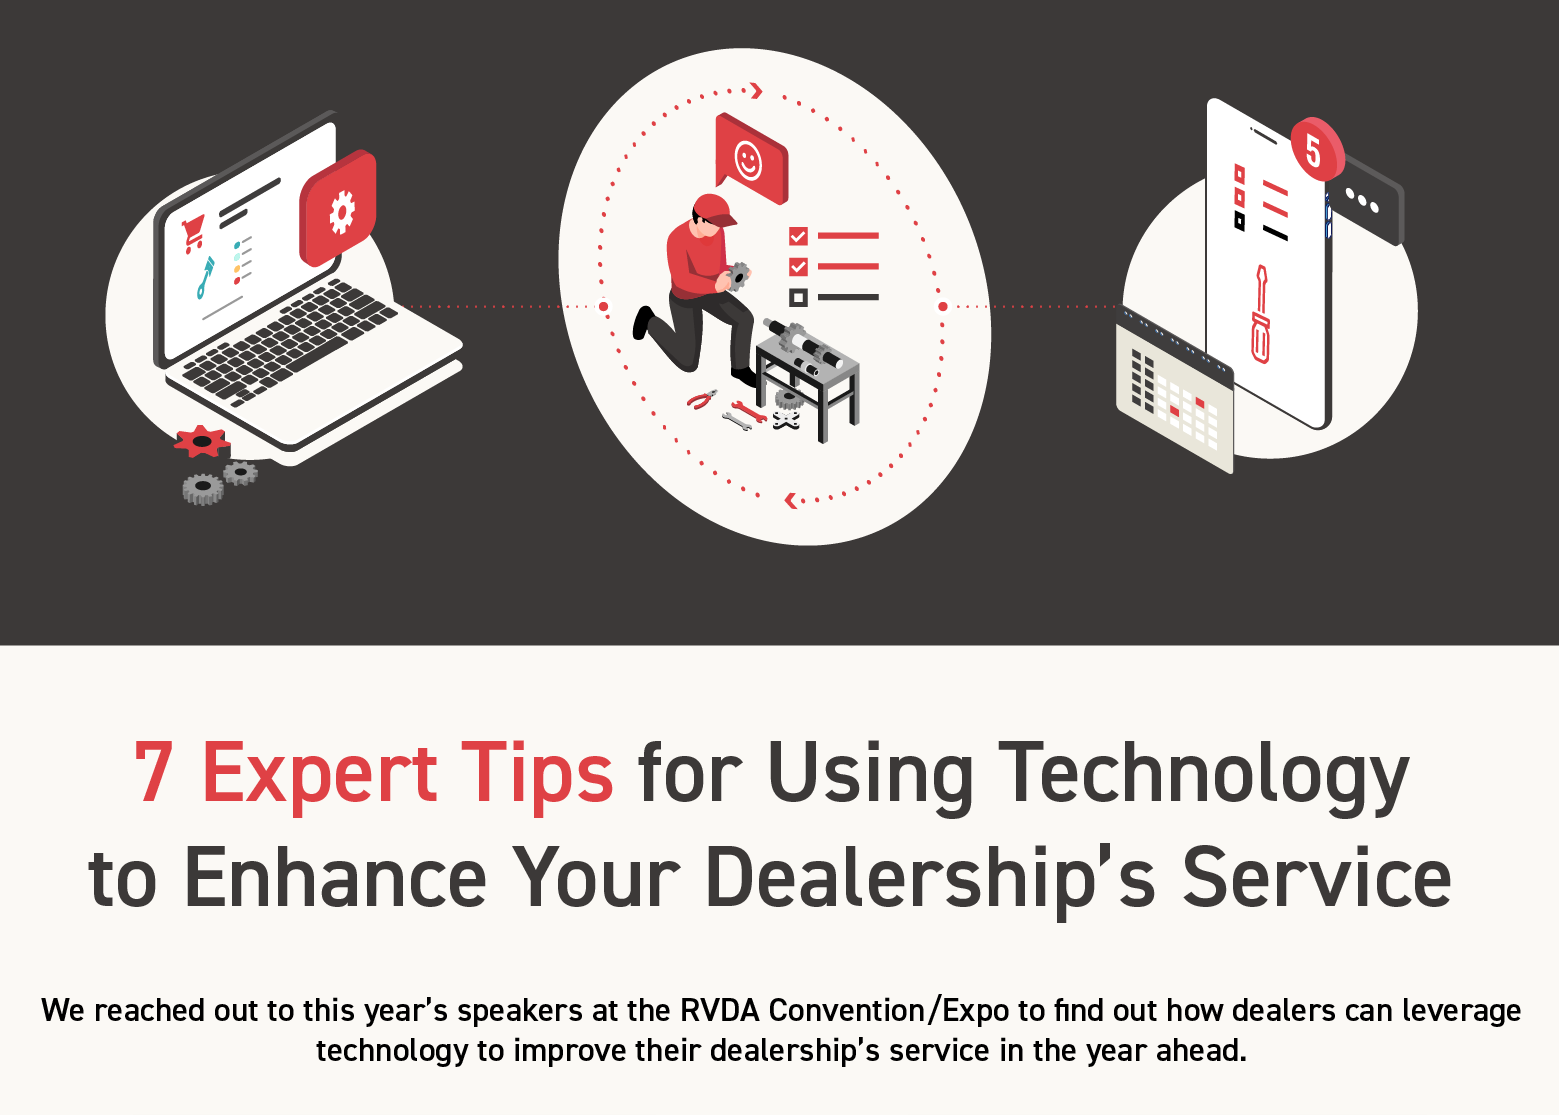 7 Expert Tips for Using Technology to Enhance Your Dealership’s Service 